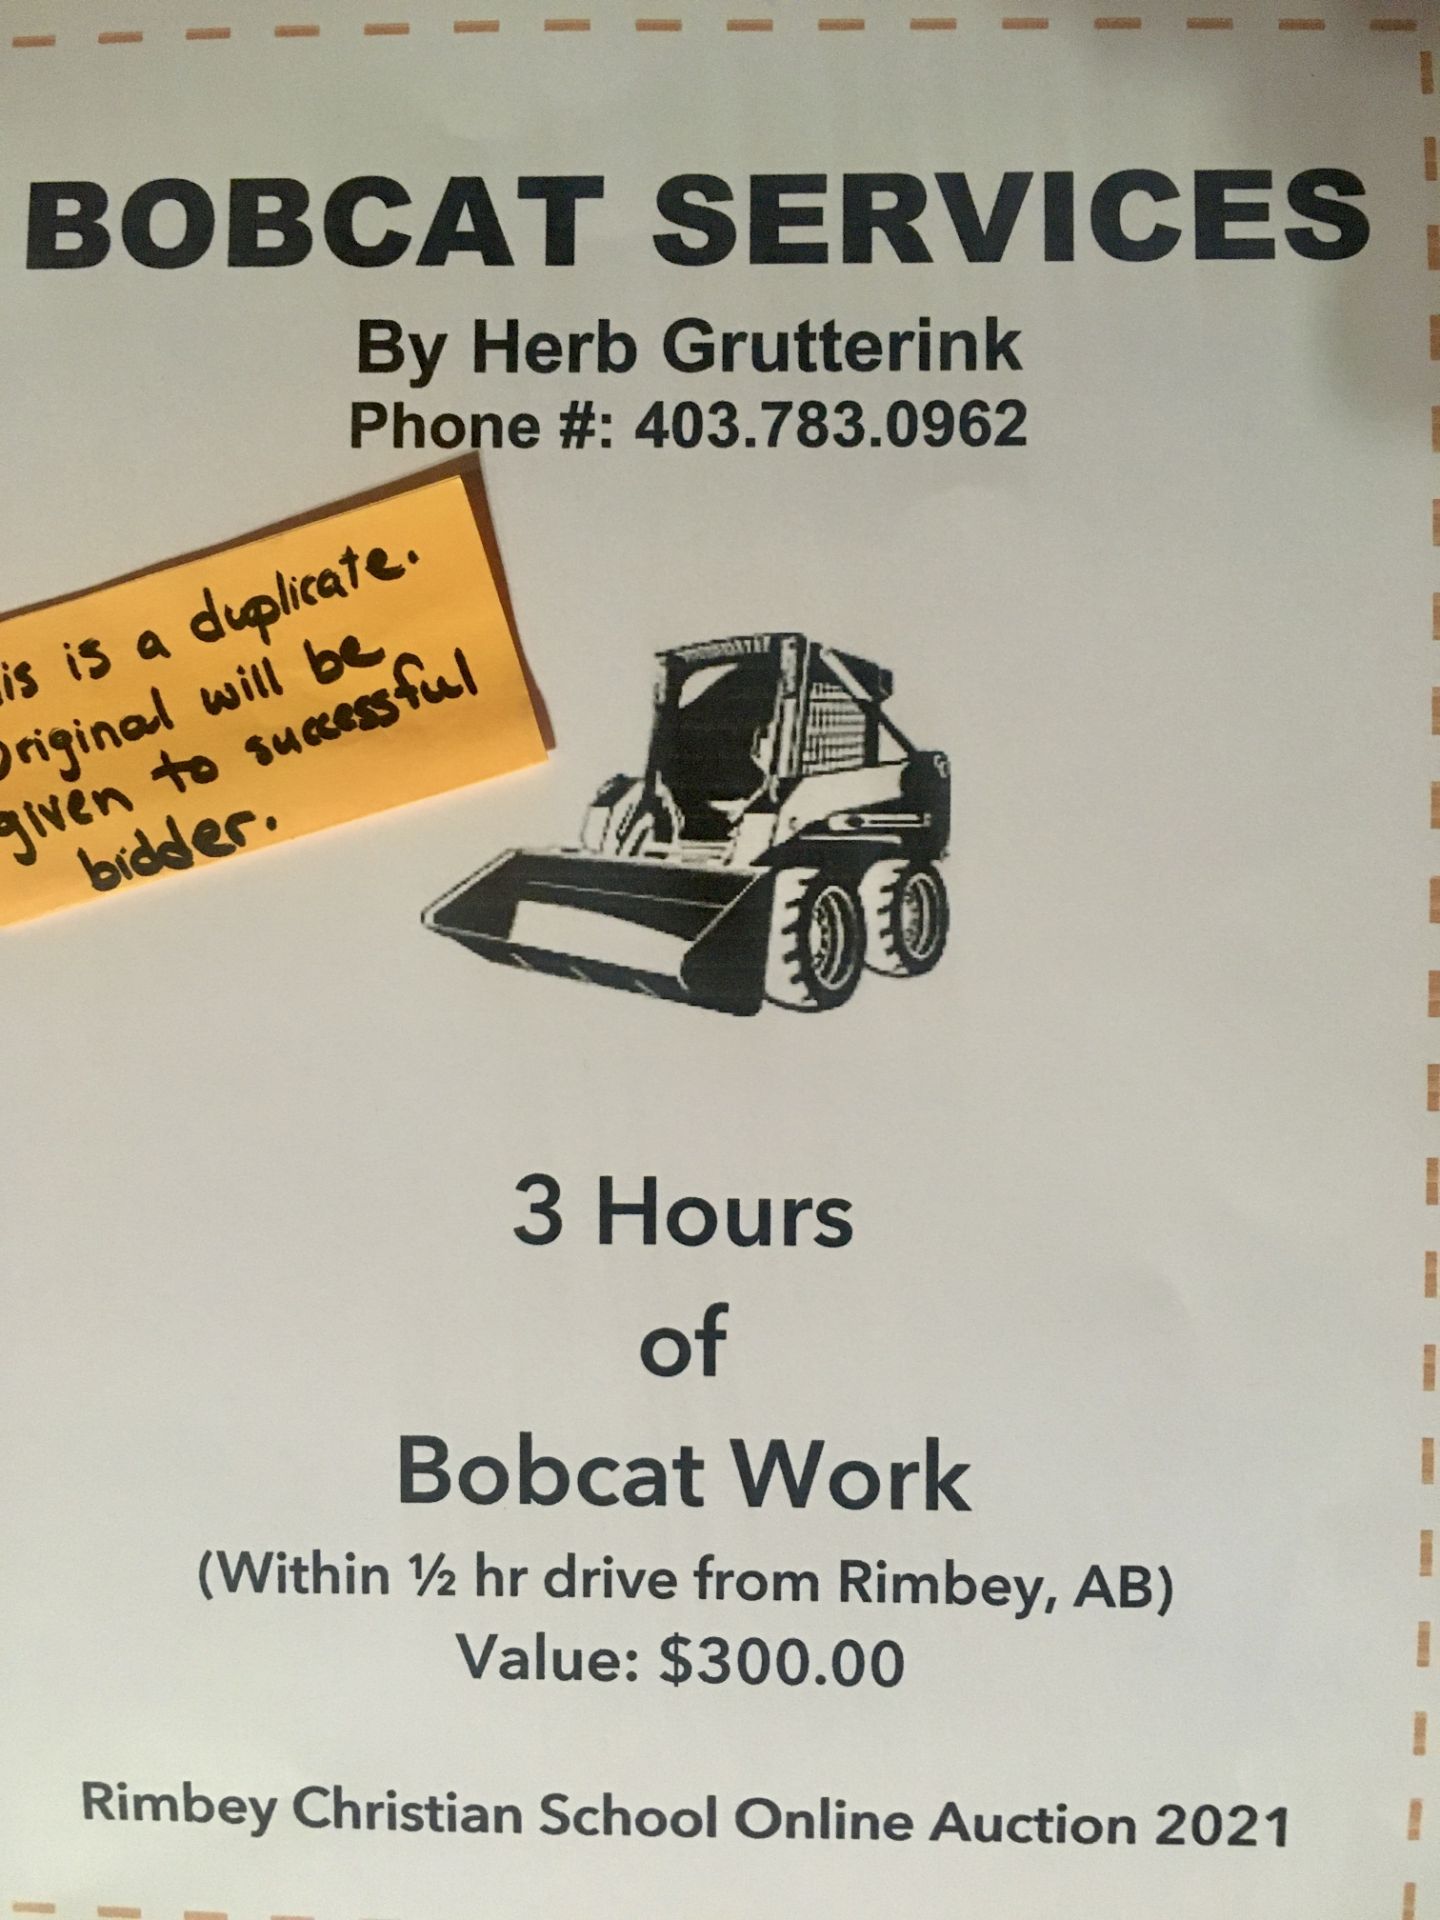 GRUTTERINK BOBCAT SERVICES 3 Hours of Bobcat Work by Herb Grutterink. Needs to be within 1/2 drive - Image 2 of 2